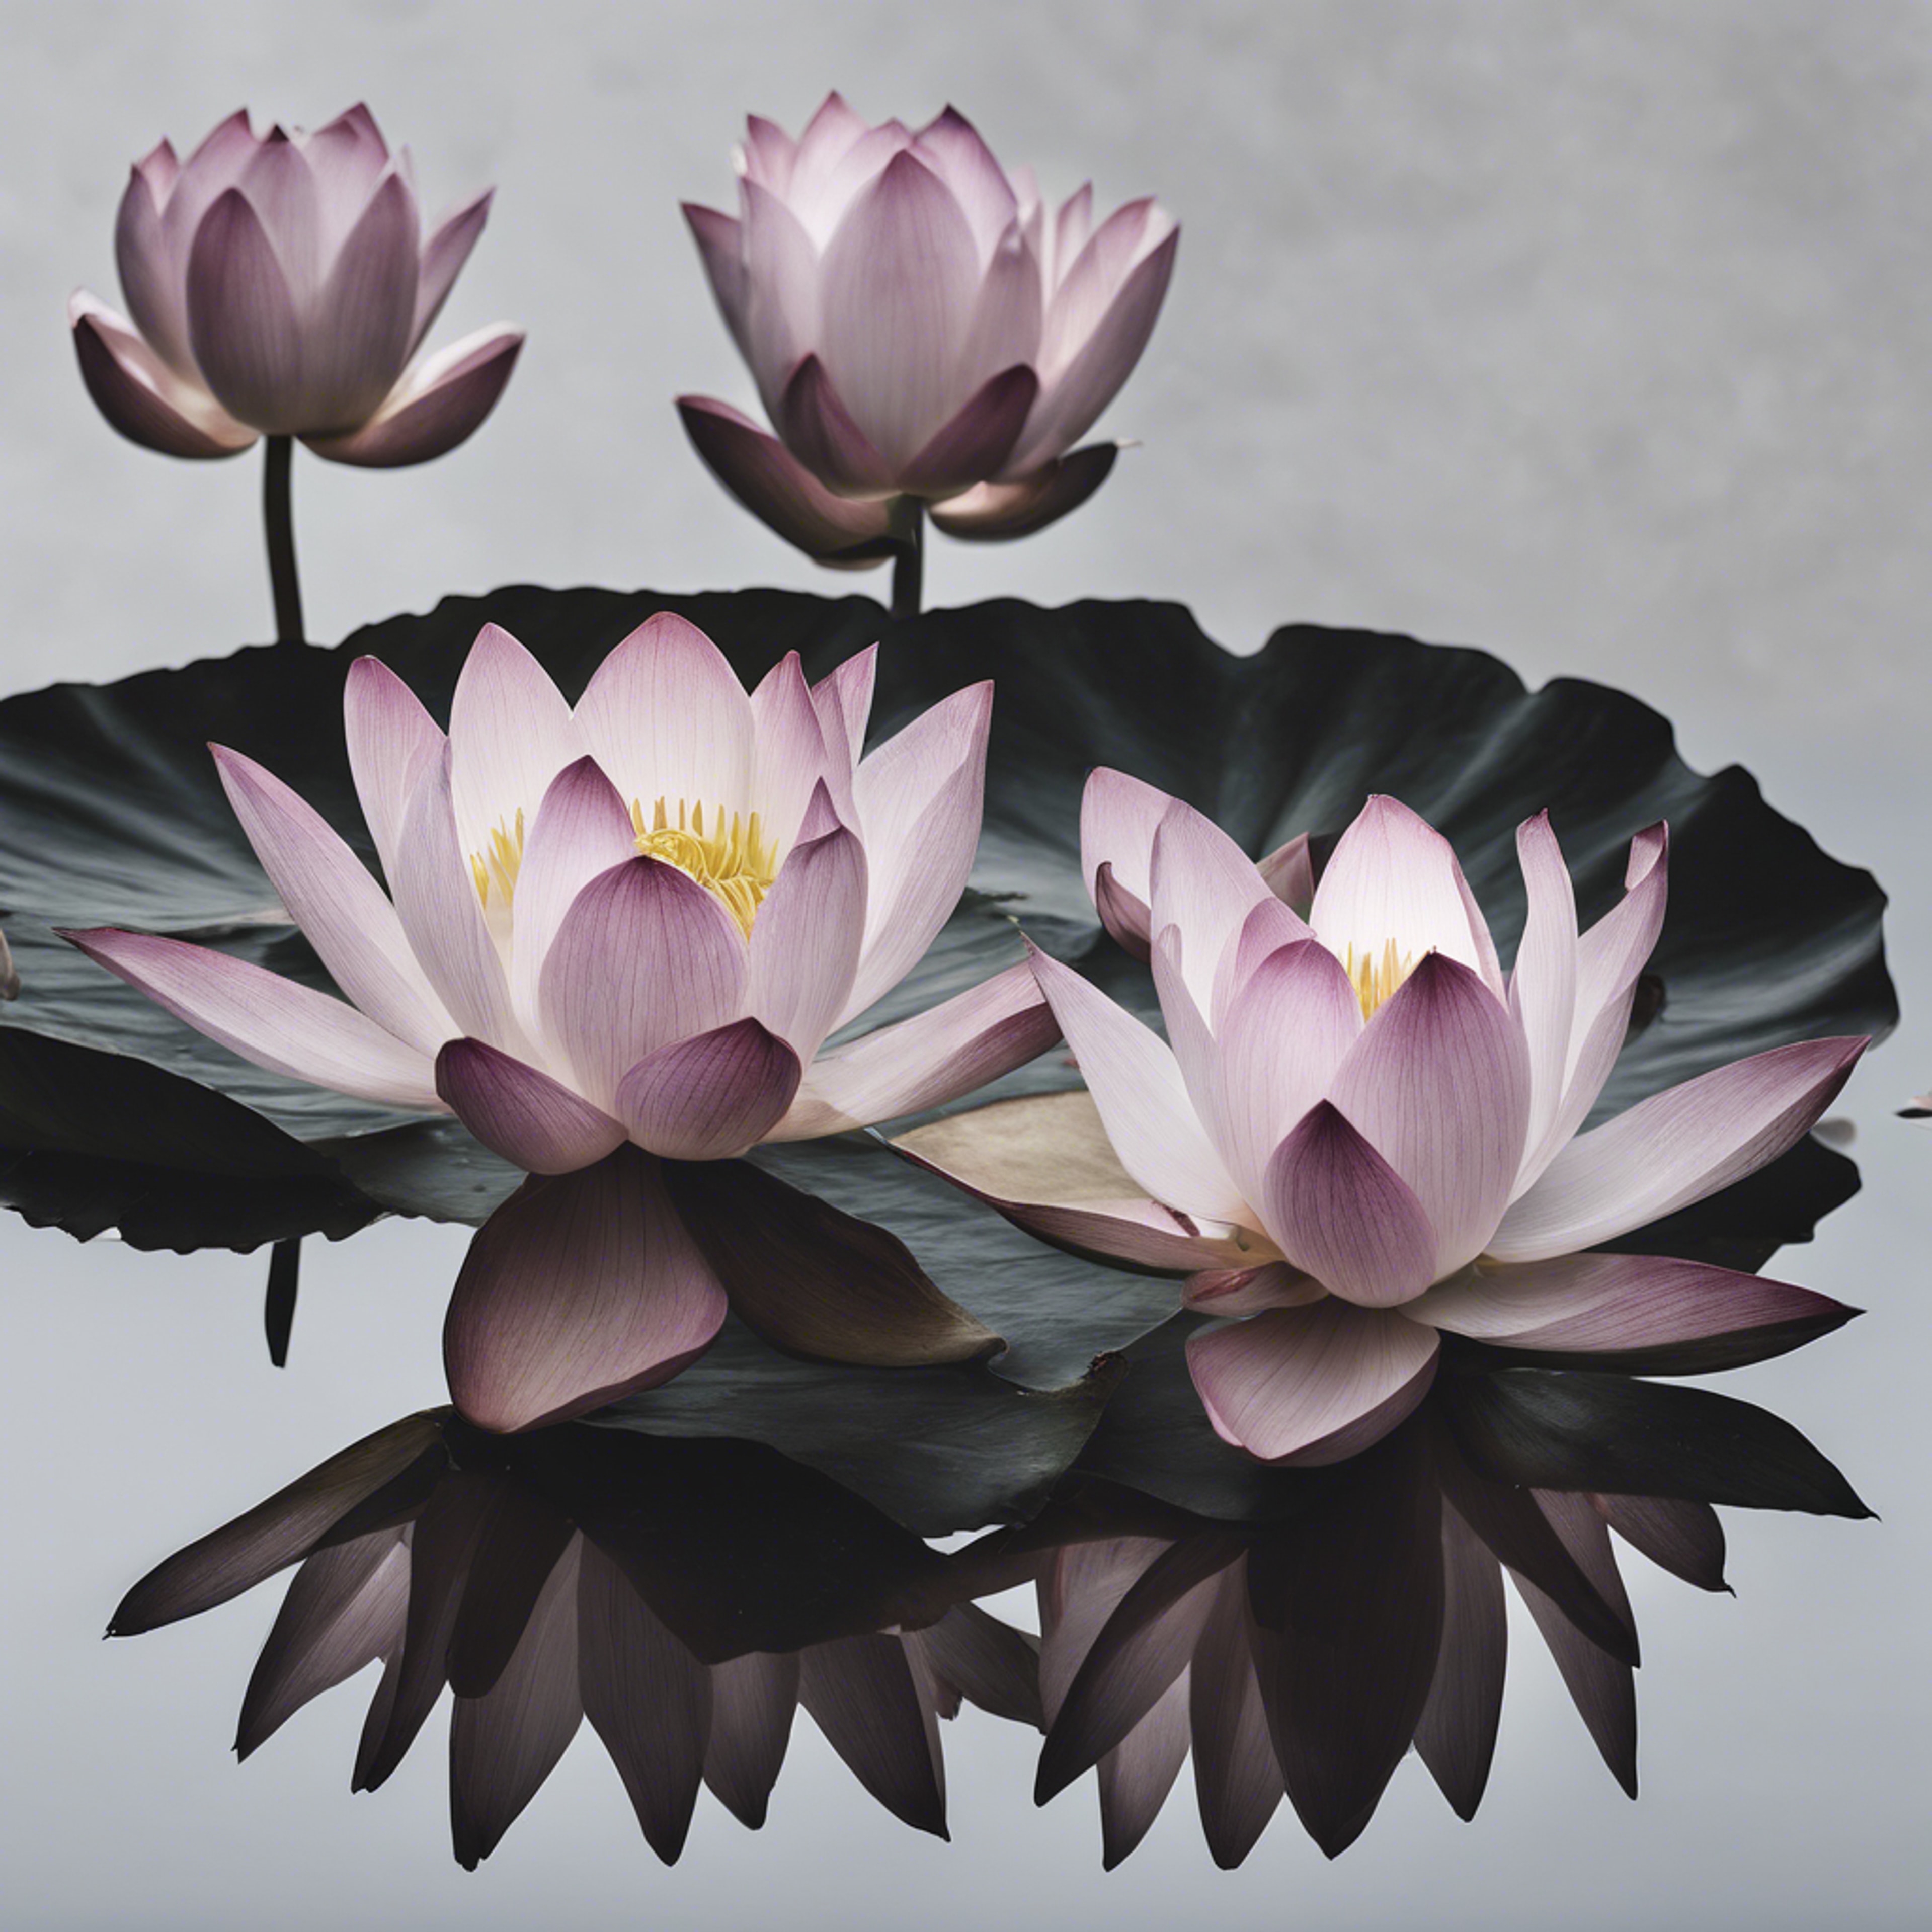 Dark lotuses floating elegantly on a textured white canvas. Валлпапер[326d2c6a66b946e99dbc]